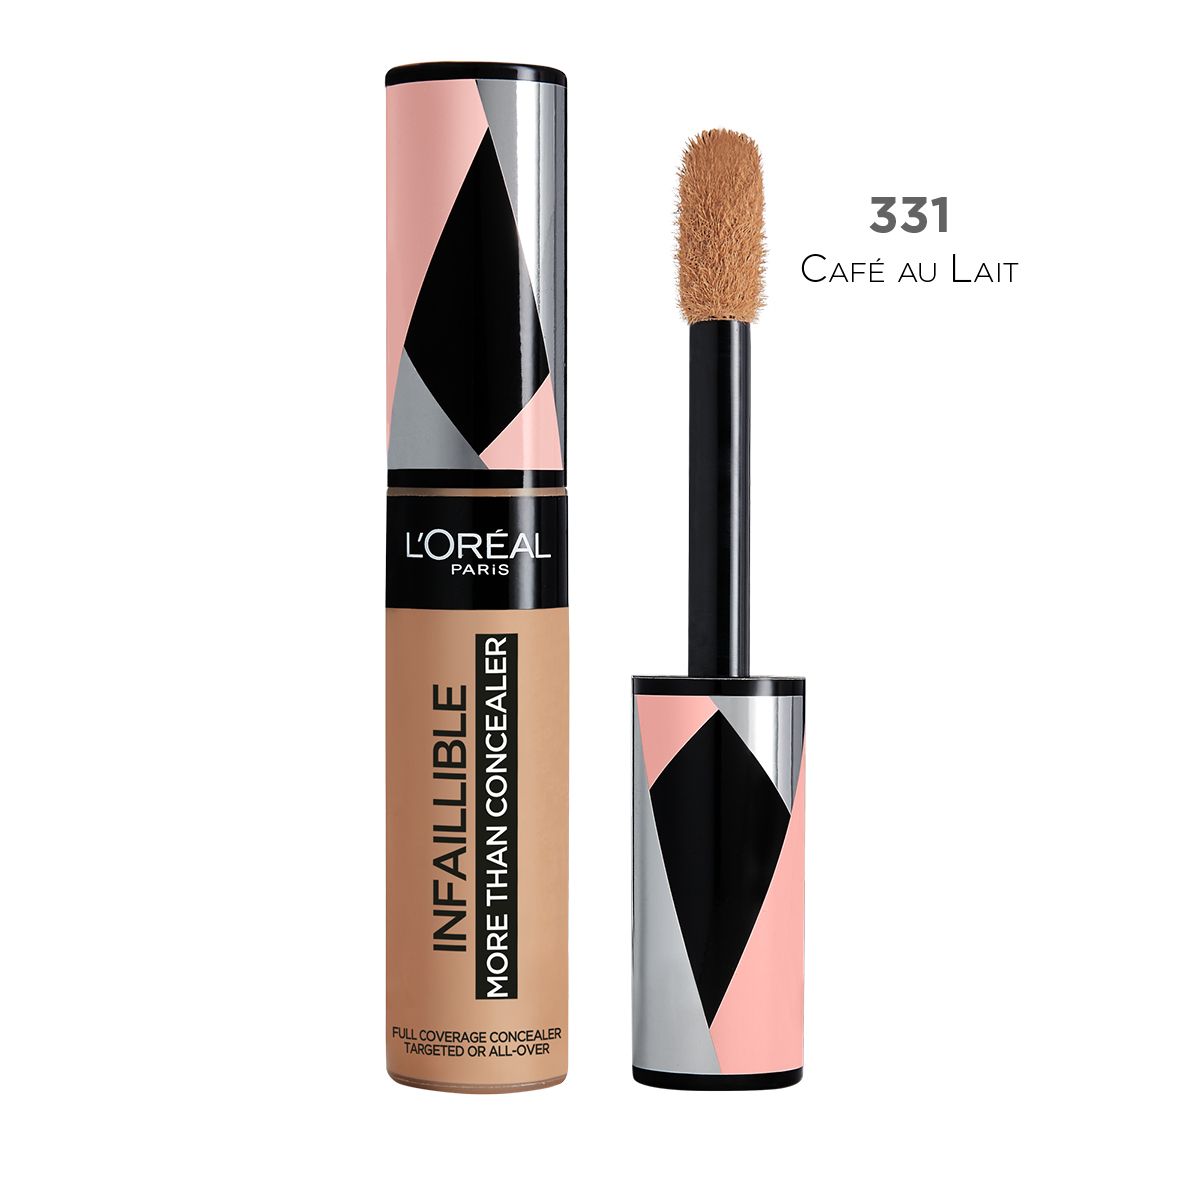 L'Oreal More Than Concealer 331 Latte Correttore